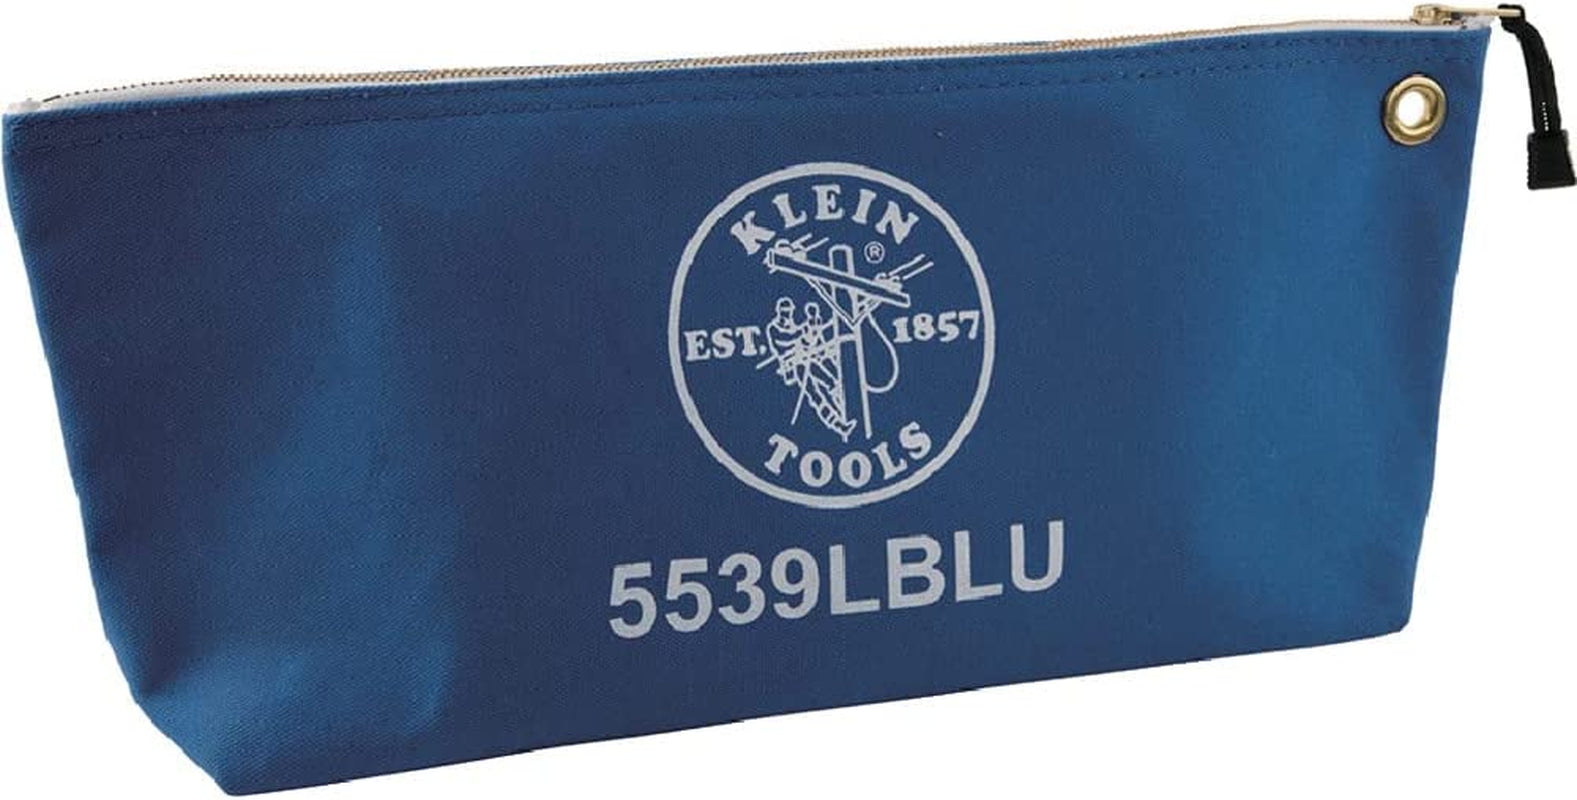 KLEIN TOOLS, Klein Tools 5539LBLU Zipper Bag, Large 16-Inch Canvas Tool Pouch for Tool Storage with Brass Zipper, and Grommet for Hanging, Blue